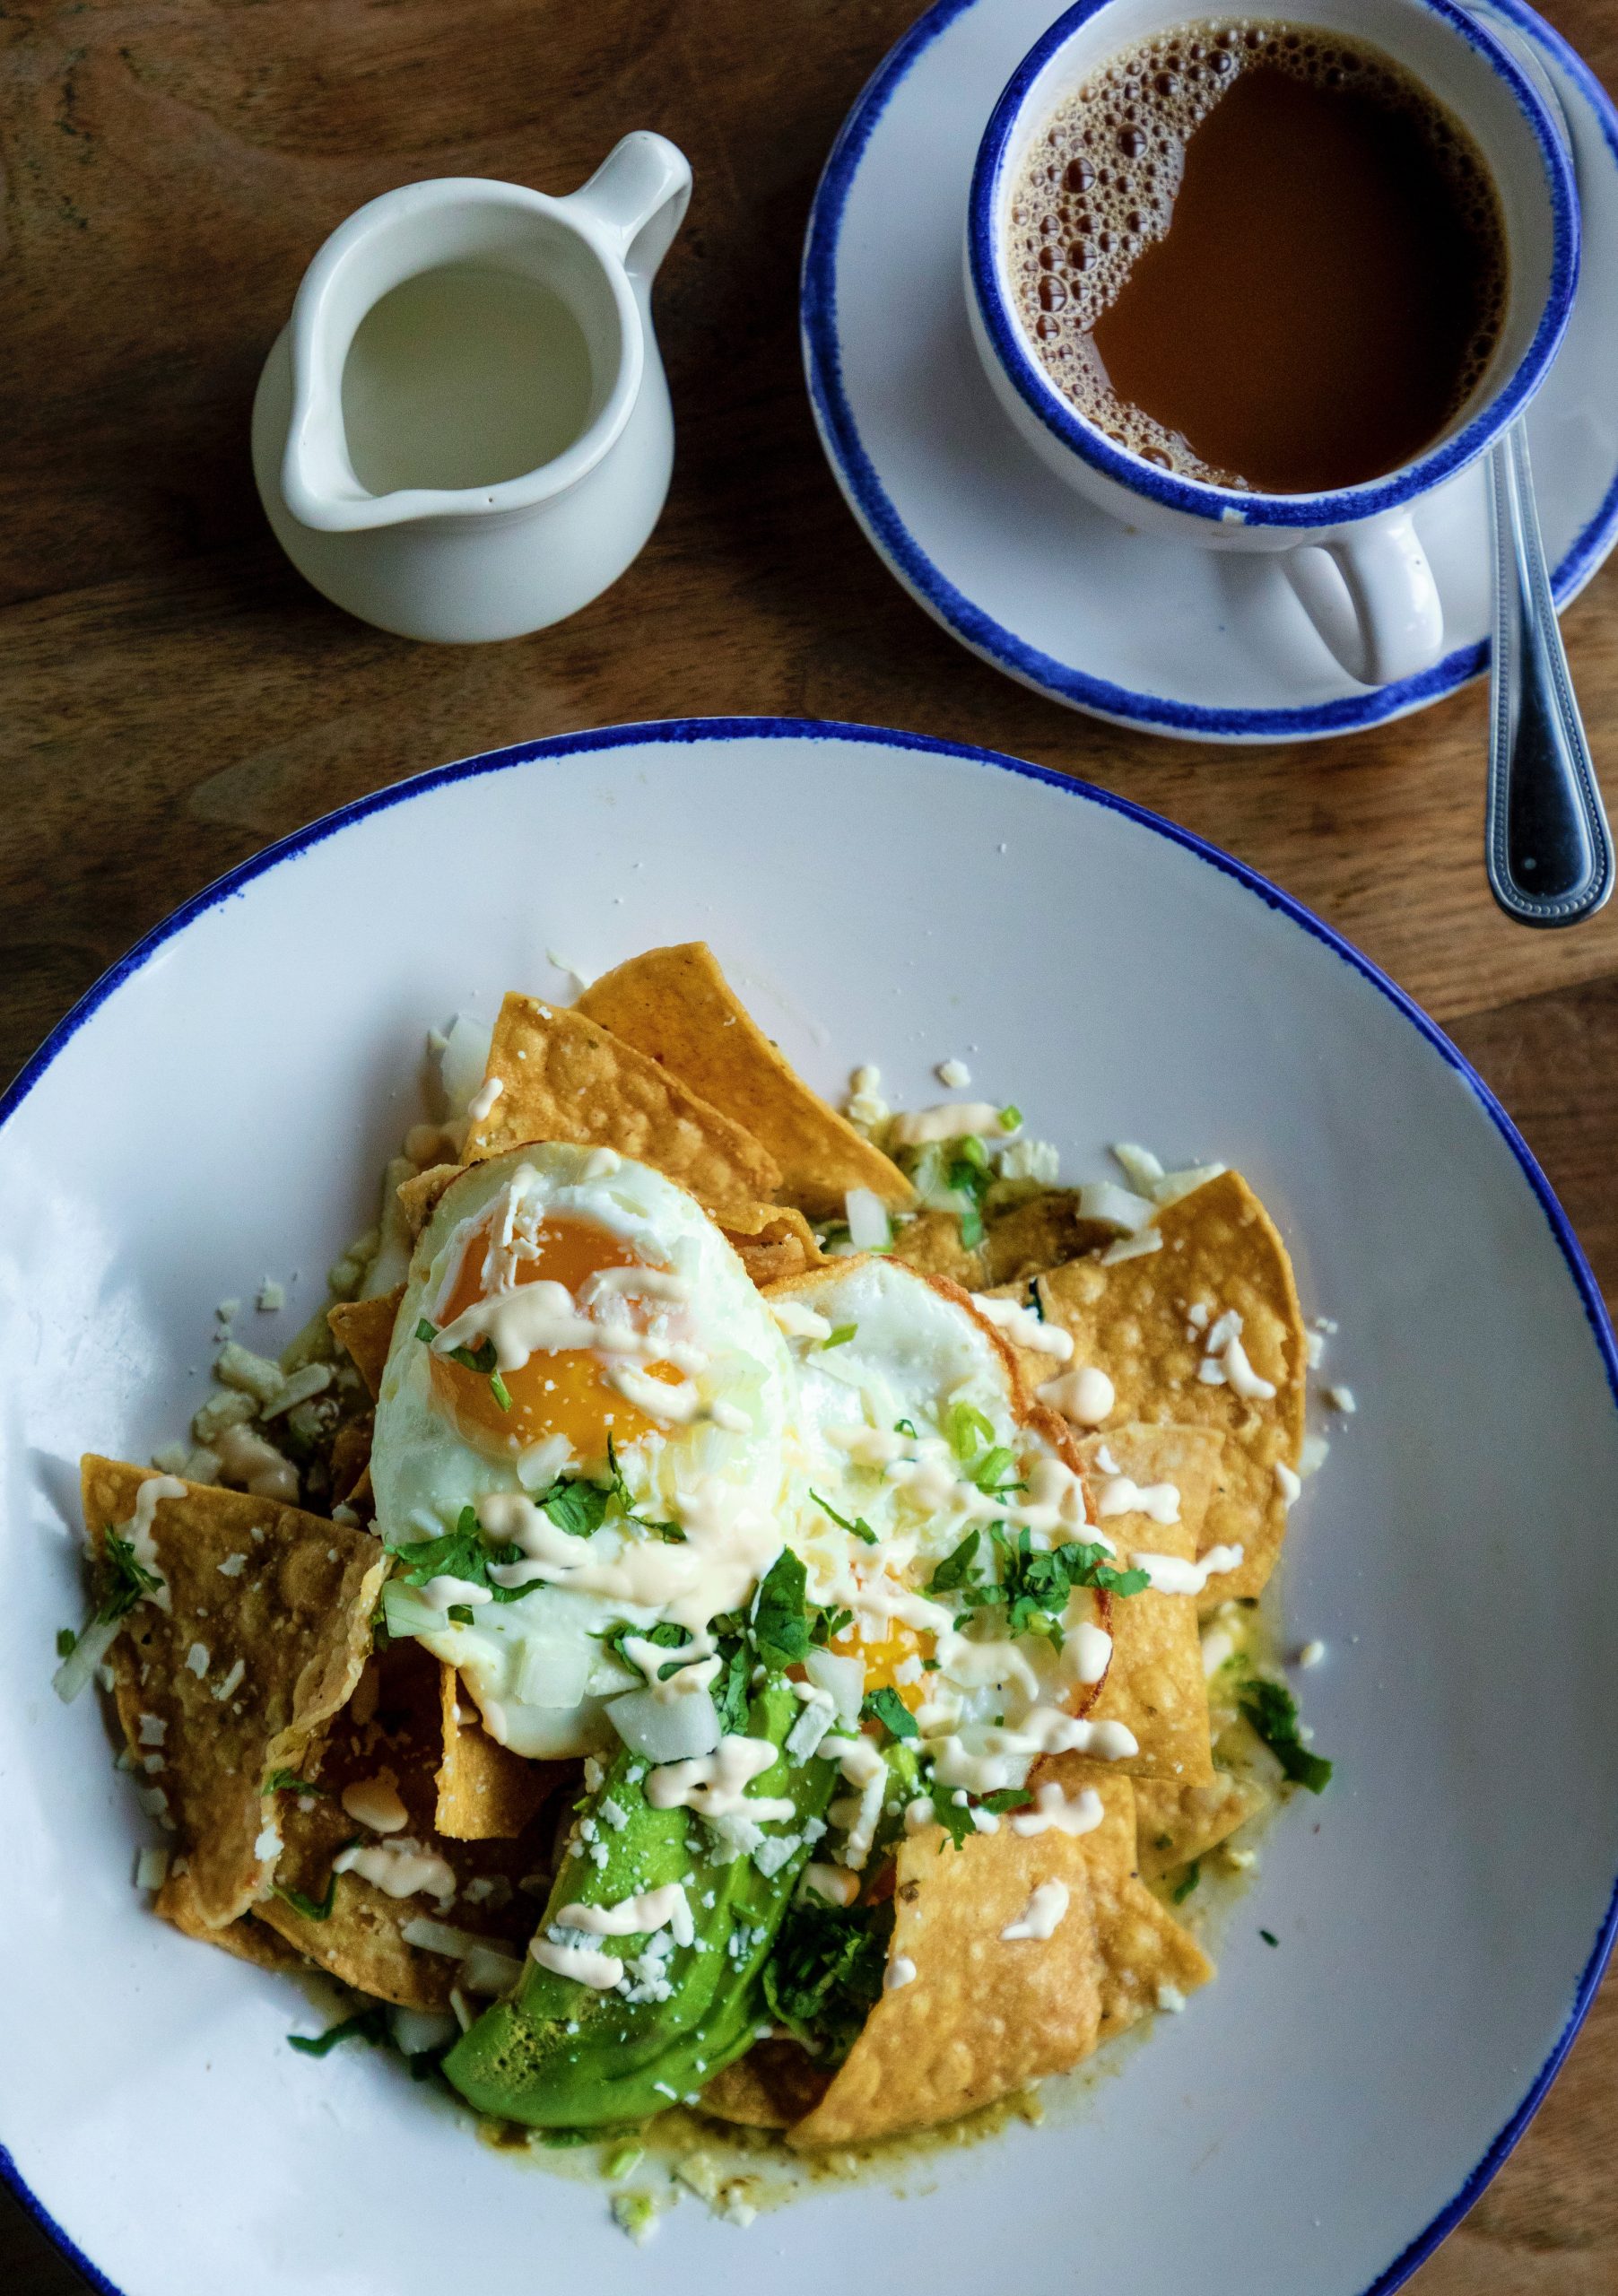 A plate of chilaquiles served with a side of coffee.